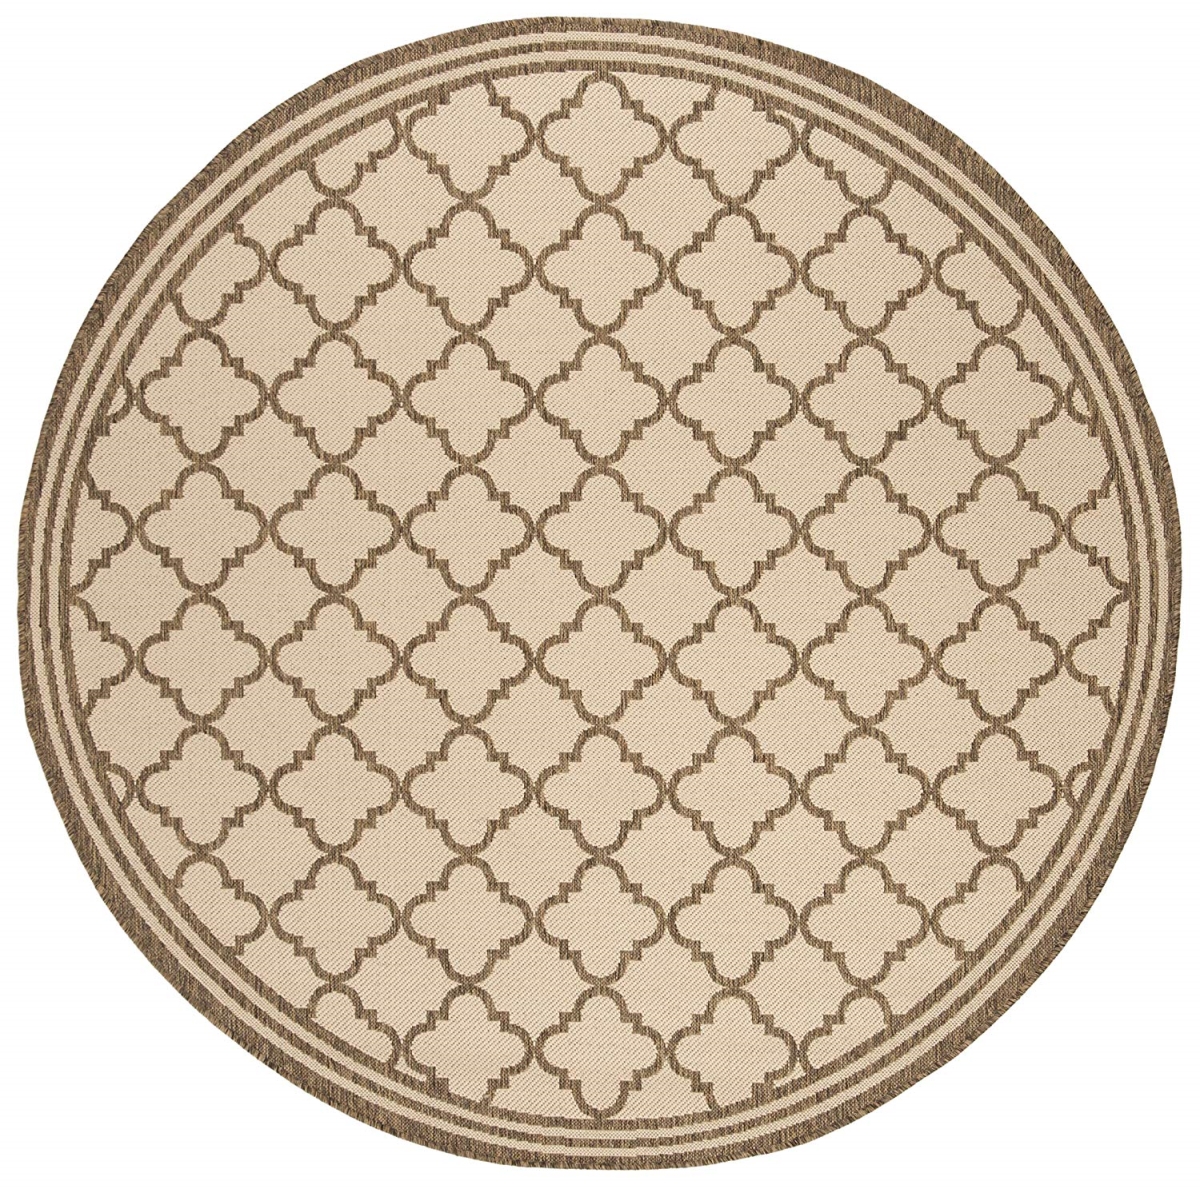 Bhs121c-6r 6 Ft. 7 In. X 6 Ft. 7 In. Beach House Contemporary Round Indoor & Outdoor Area Rugs, Cream & Beige